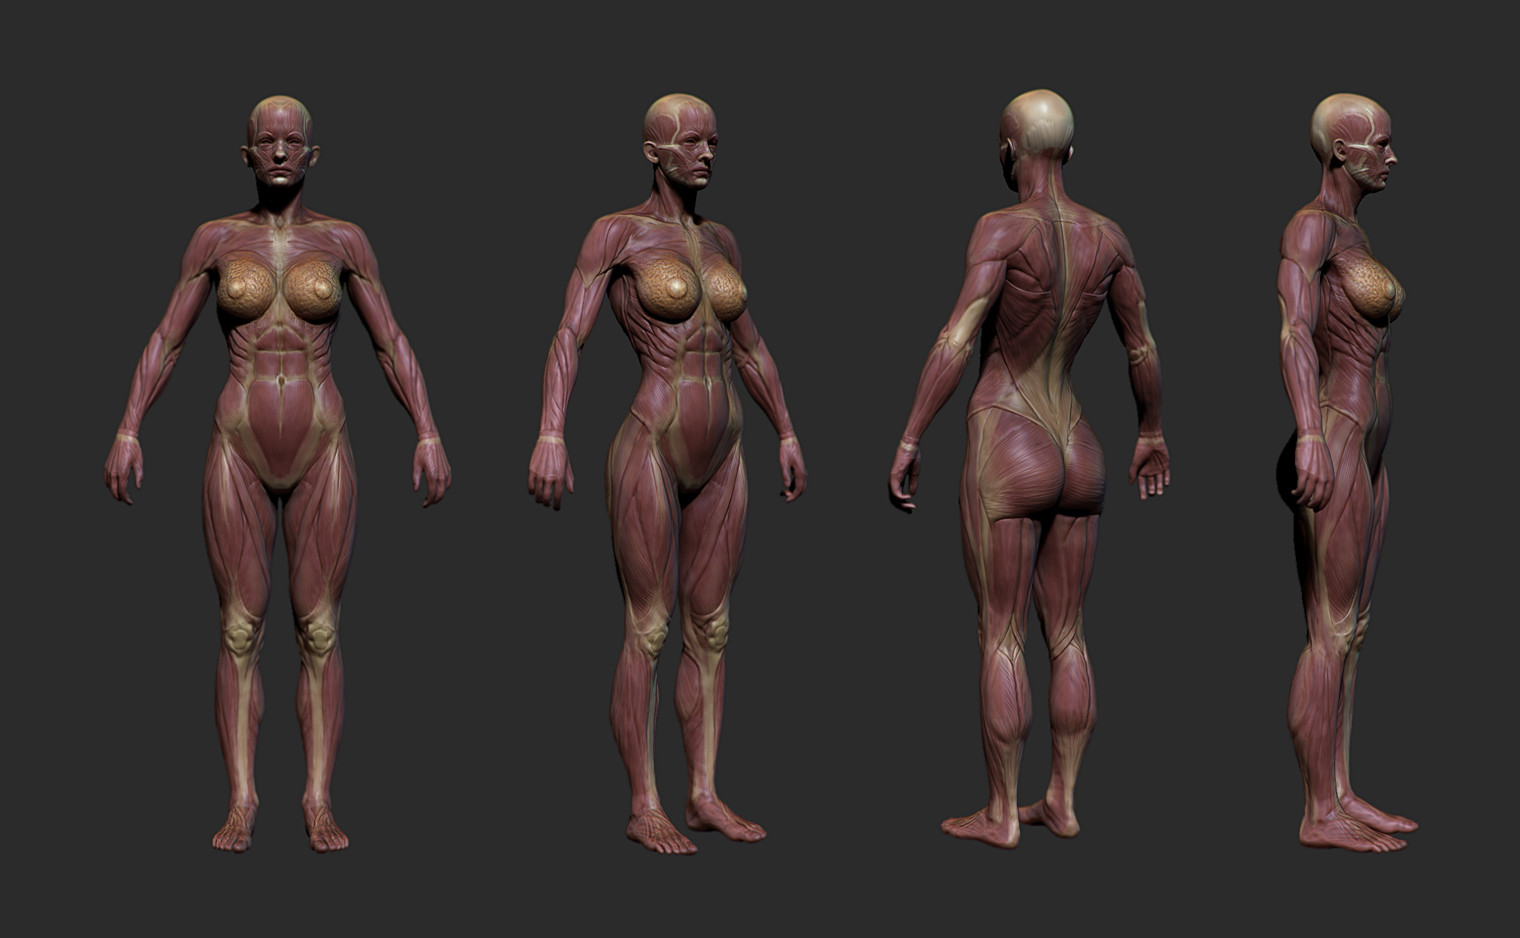 As these characters were damaged, their flesh would give way to reveal blood, muscle and bone underneath. This was one of several damage state models. This was also used for quiet's invisibility effect.